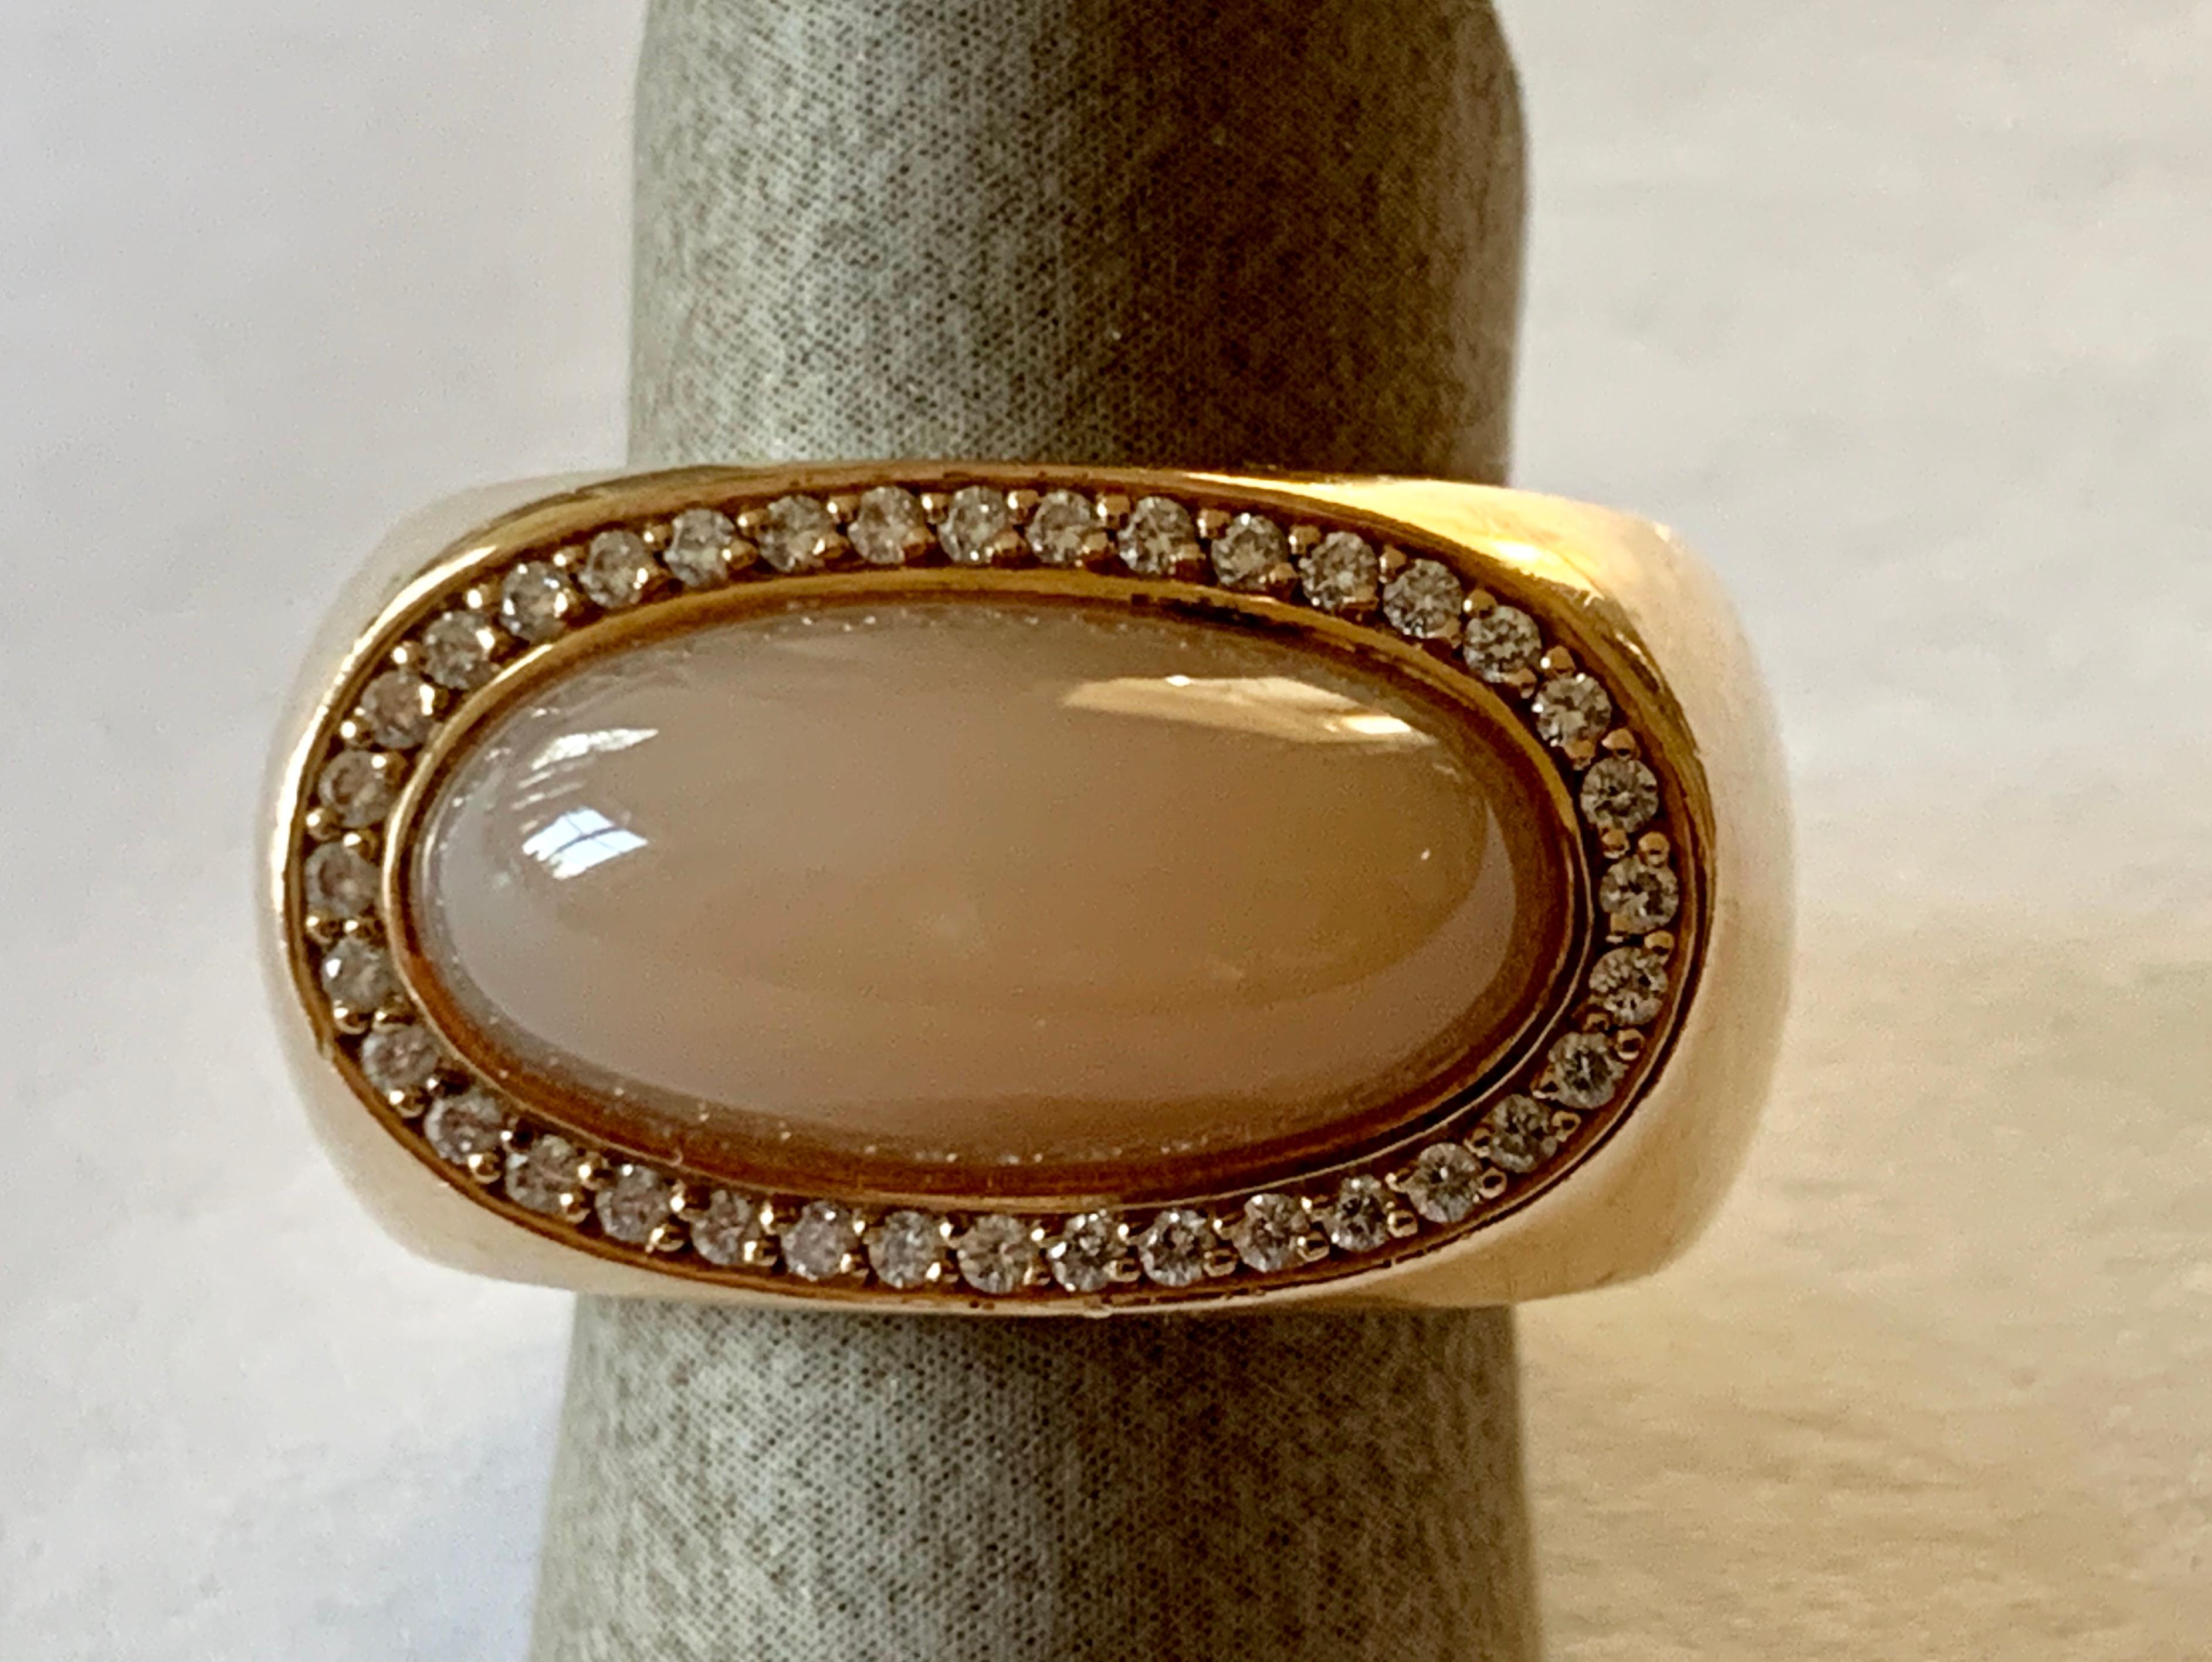 Moonstone and Diamond ring in solid rose Gold 750 created by the well-known German goldsmith Jochen Pohl. The beautiful brownish moonstone cabochon weighs 10.13 ct and is surrounded by 30 brilliant cut Diamonds totaling 0.30 ct, , F, vs. Jochen